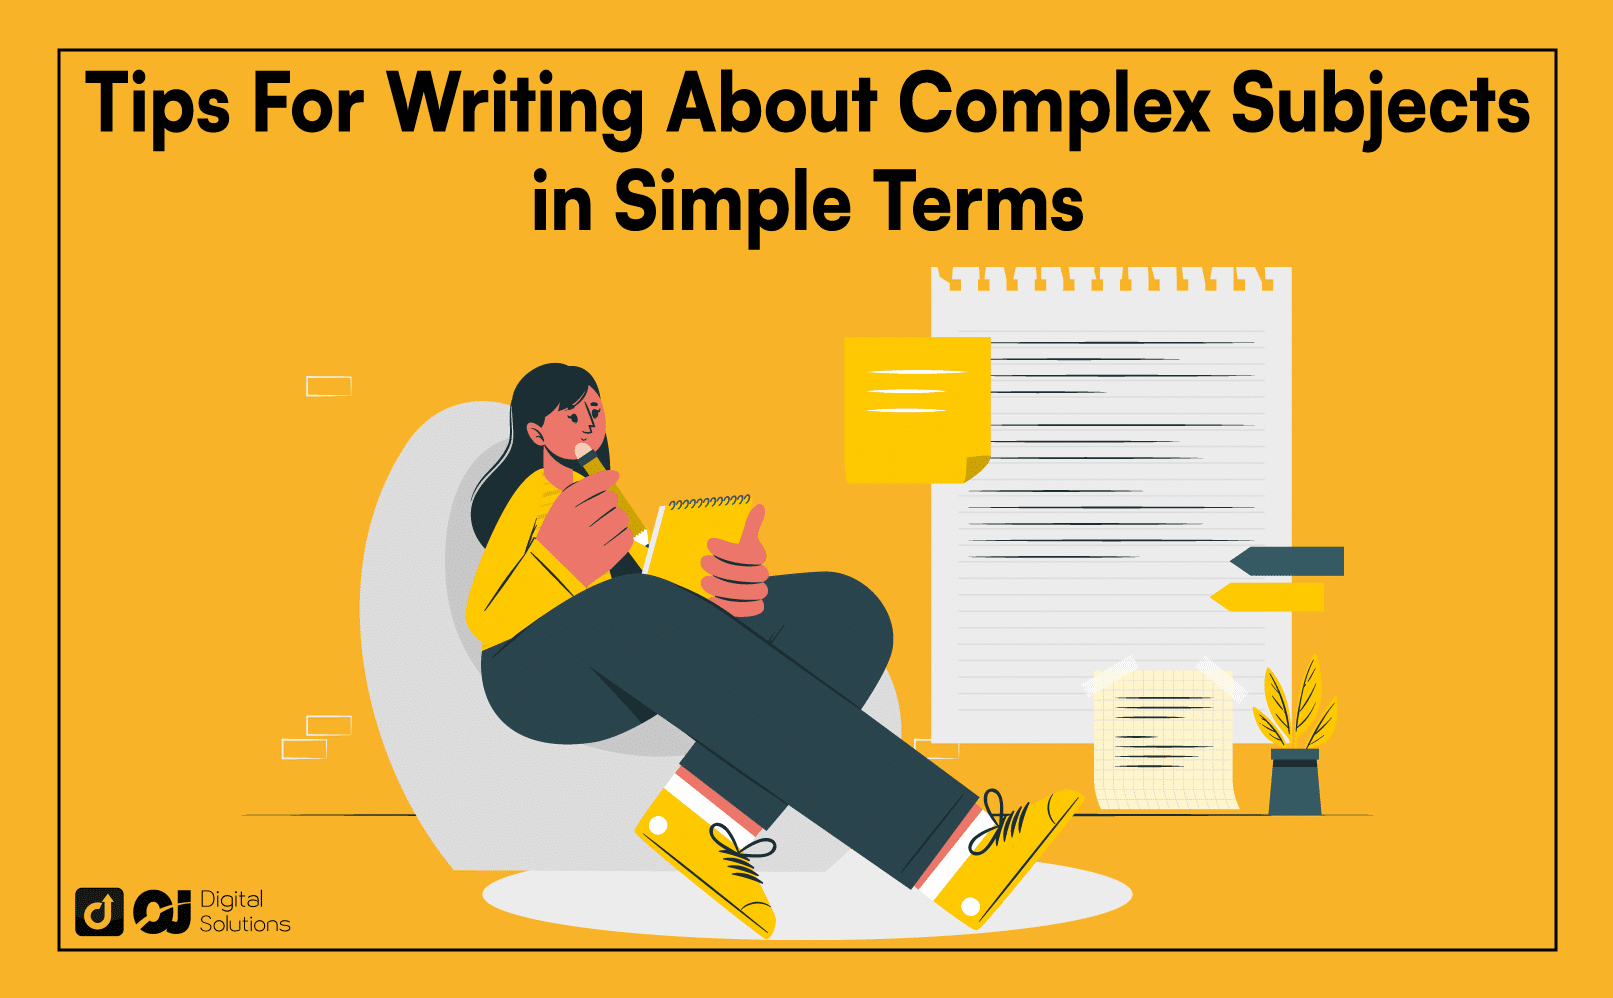 6-Tips-For-Writing-About-Complex-Subjects-in-Simple-Terms